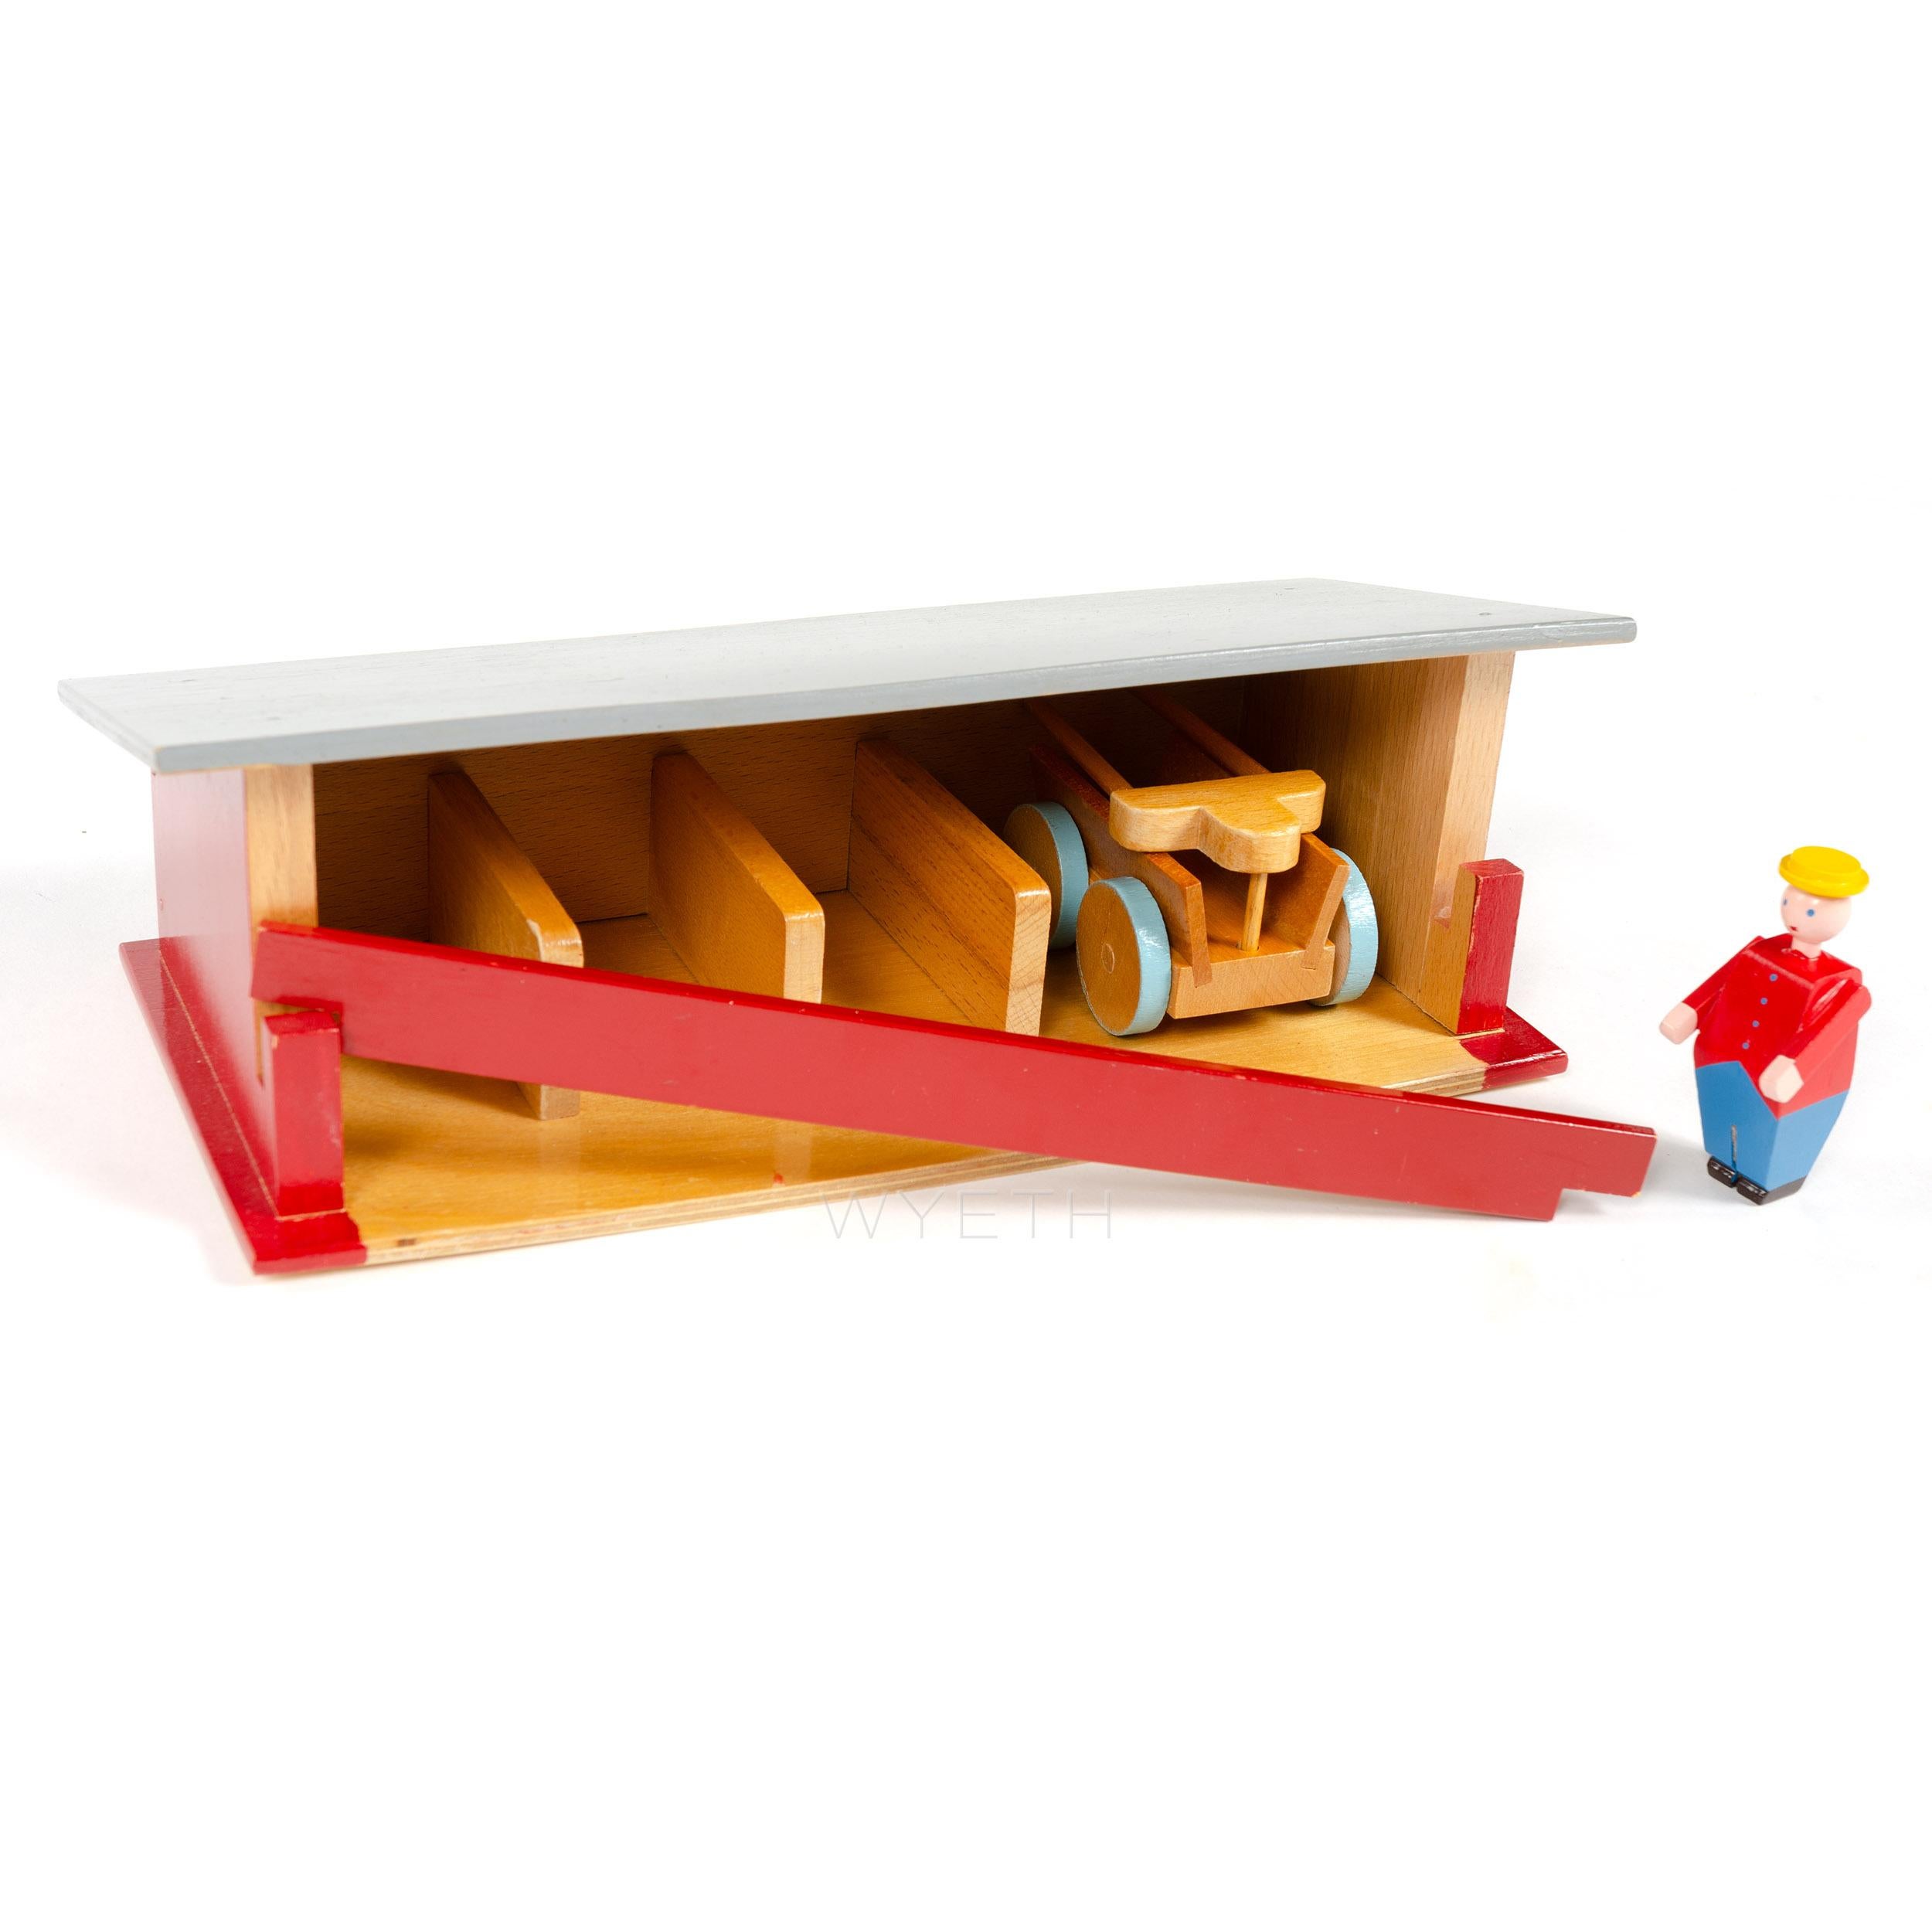 A brightly colored and whimsical miniature farm set by the Danish master of whimsey Kay Bojesen. The fifteen individual wooden pieces consist of a farmhouse of laminated beech with removable gray roof, two beds a bench, two tables, barn of laminated